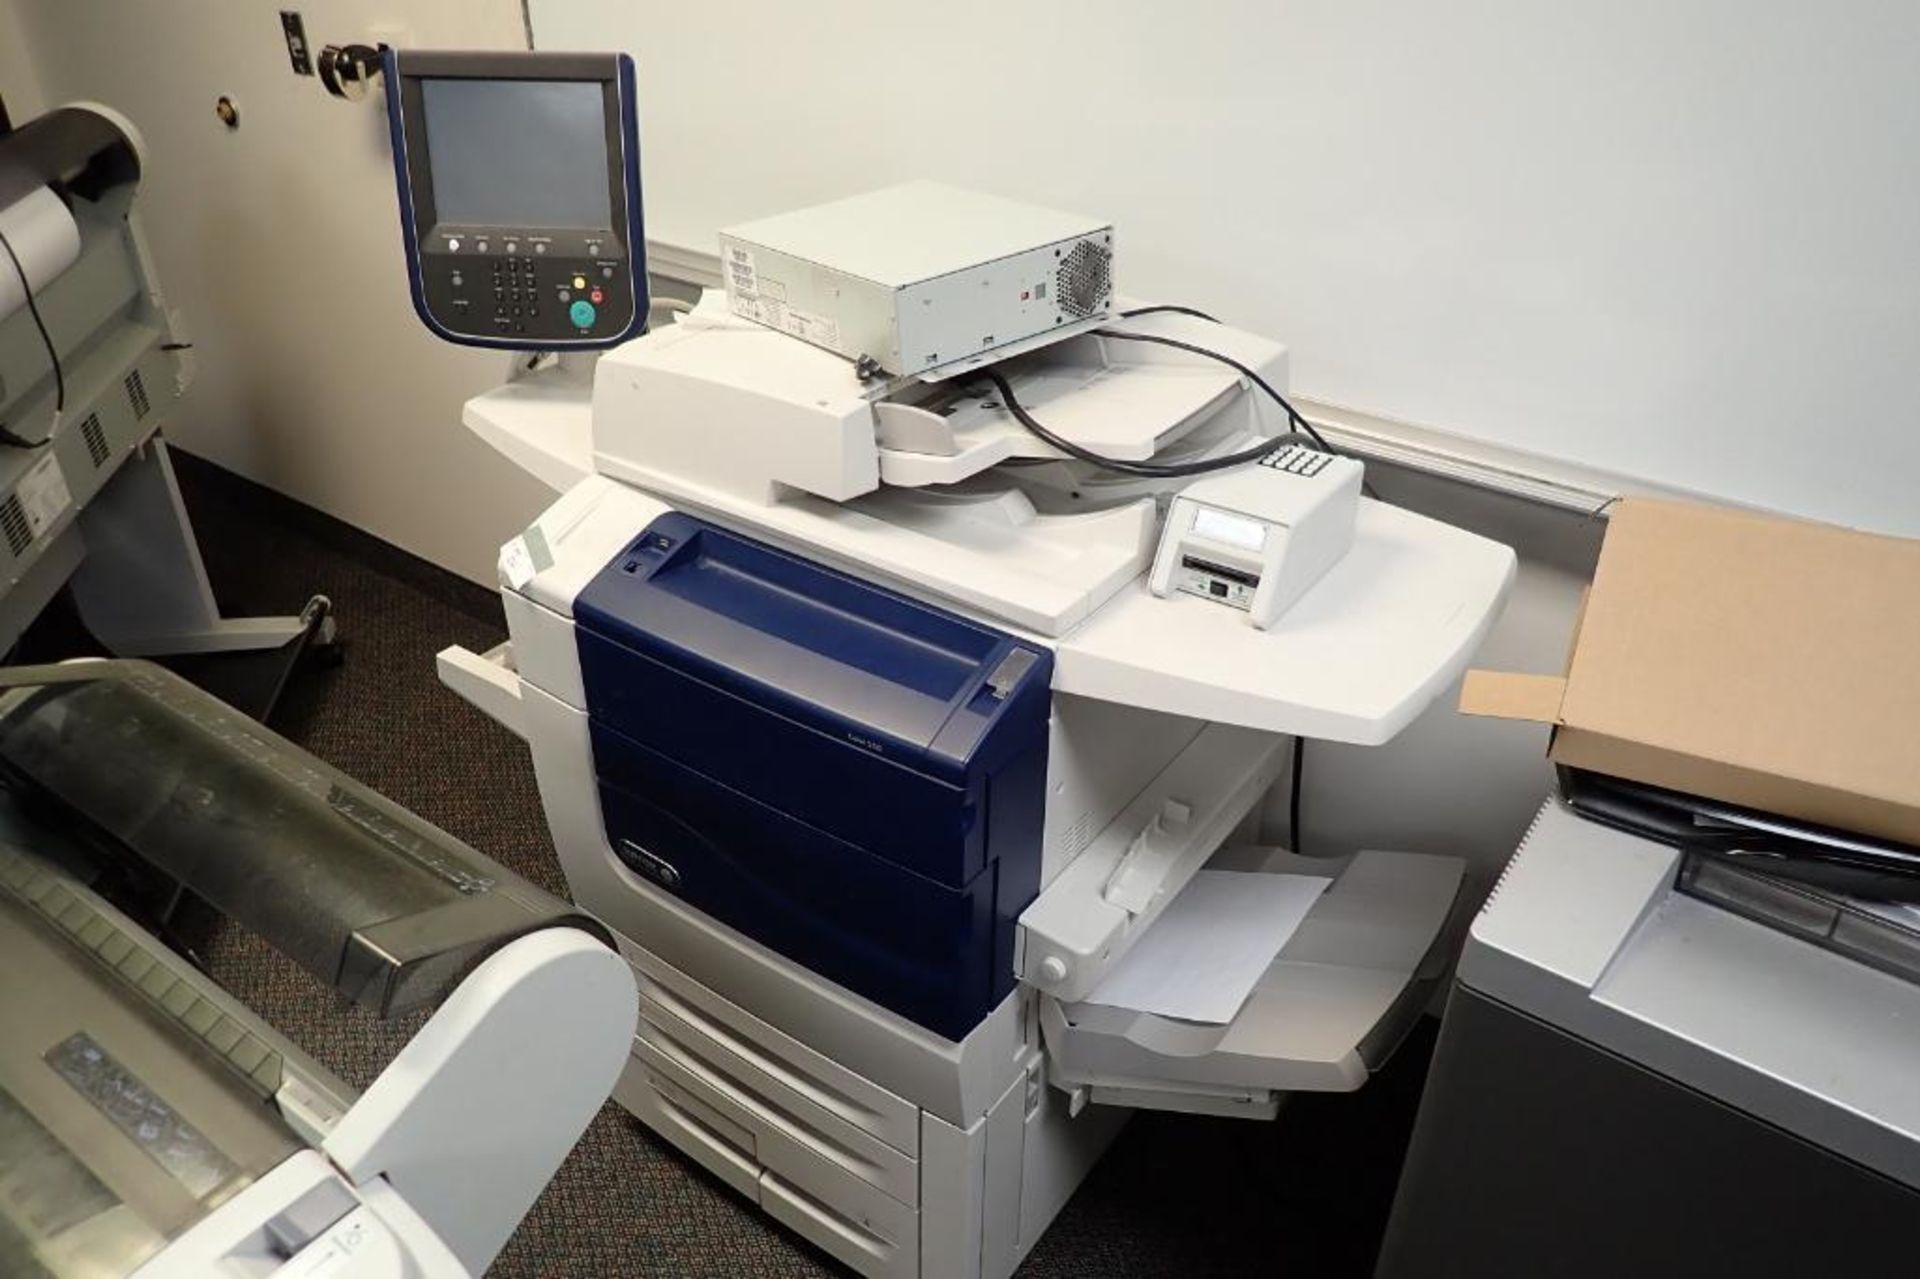 Xerox color 550 office printer/scanner/fax machine - Image 4 of 7